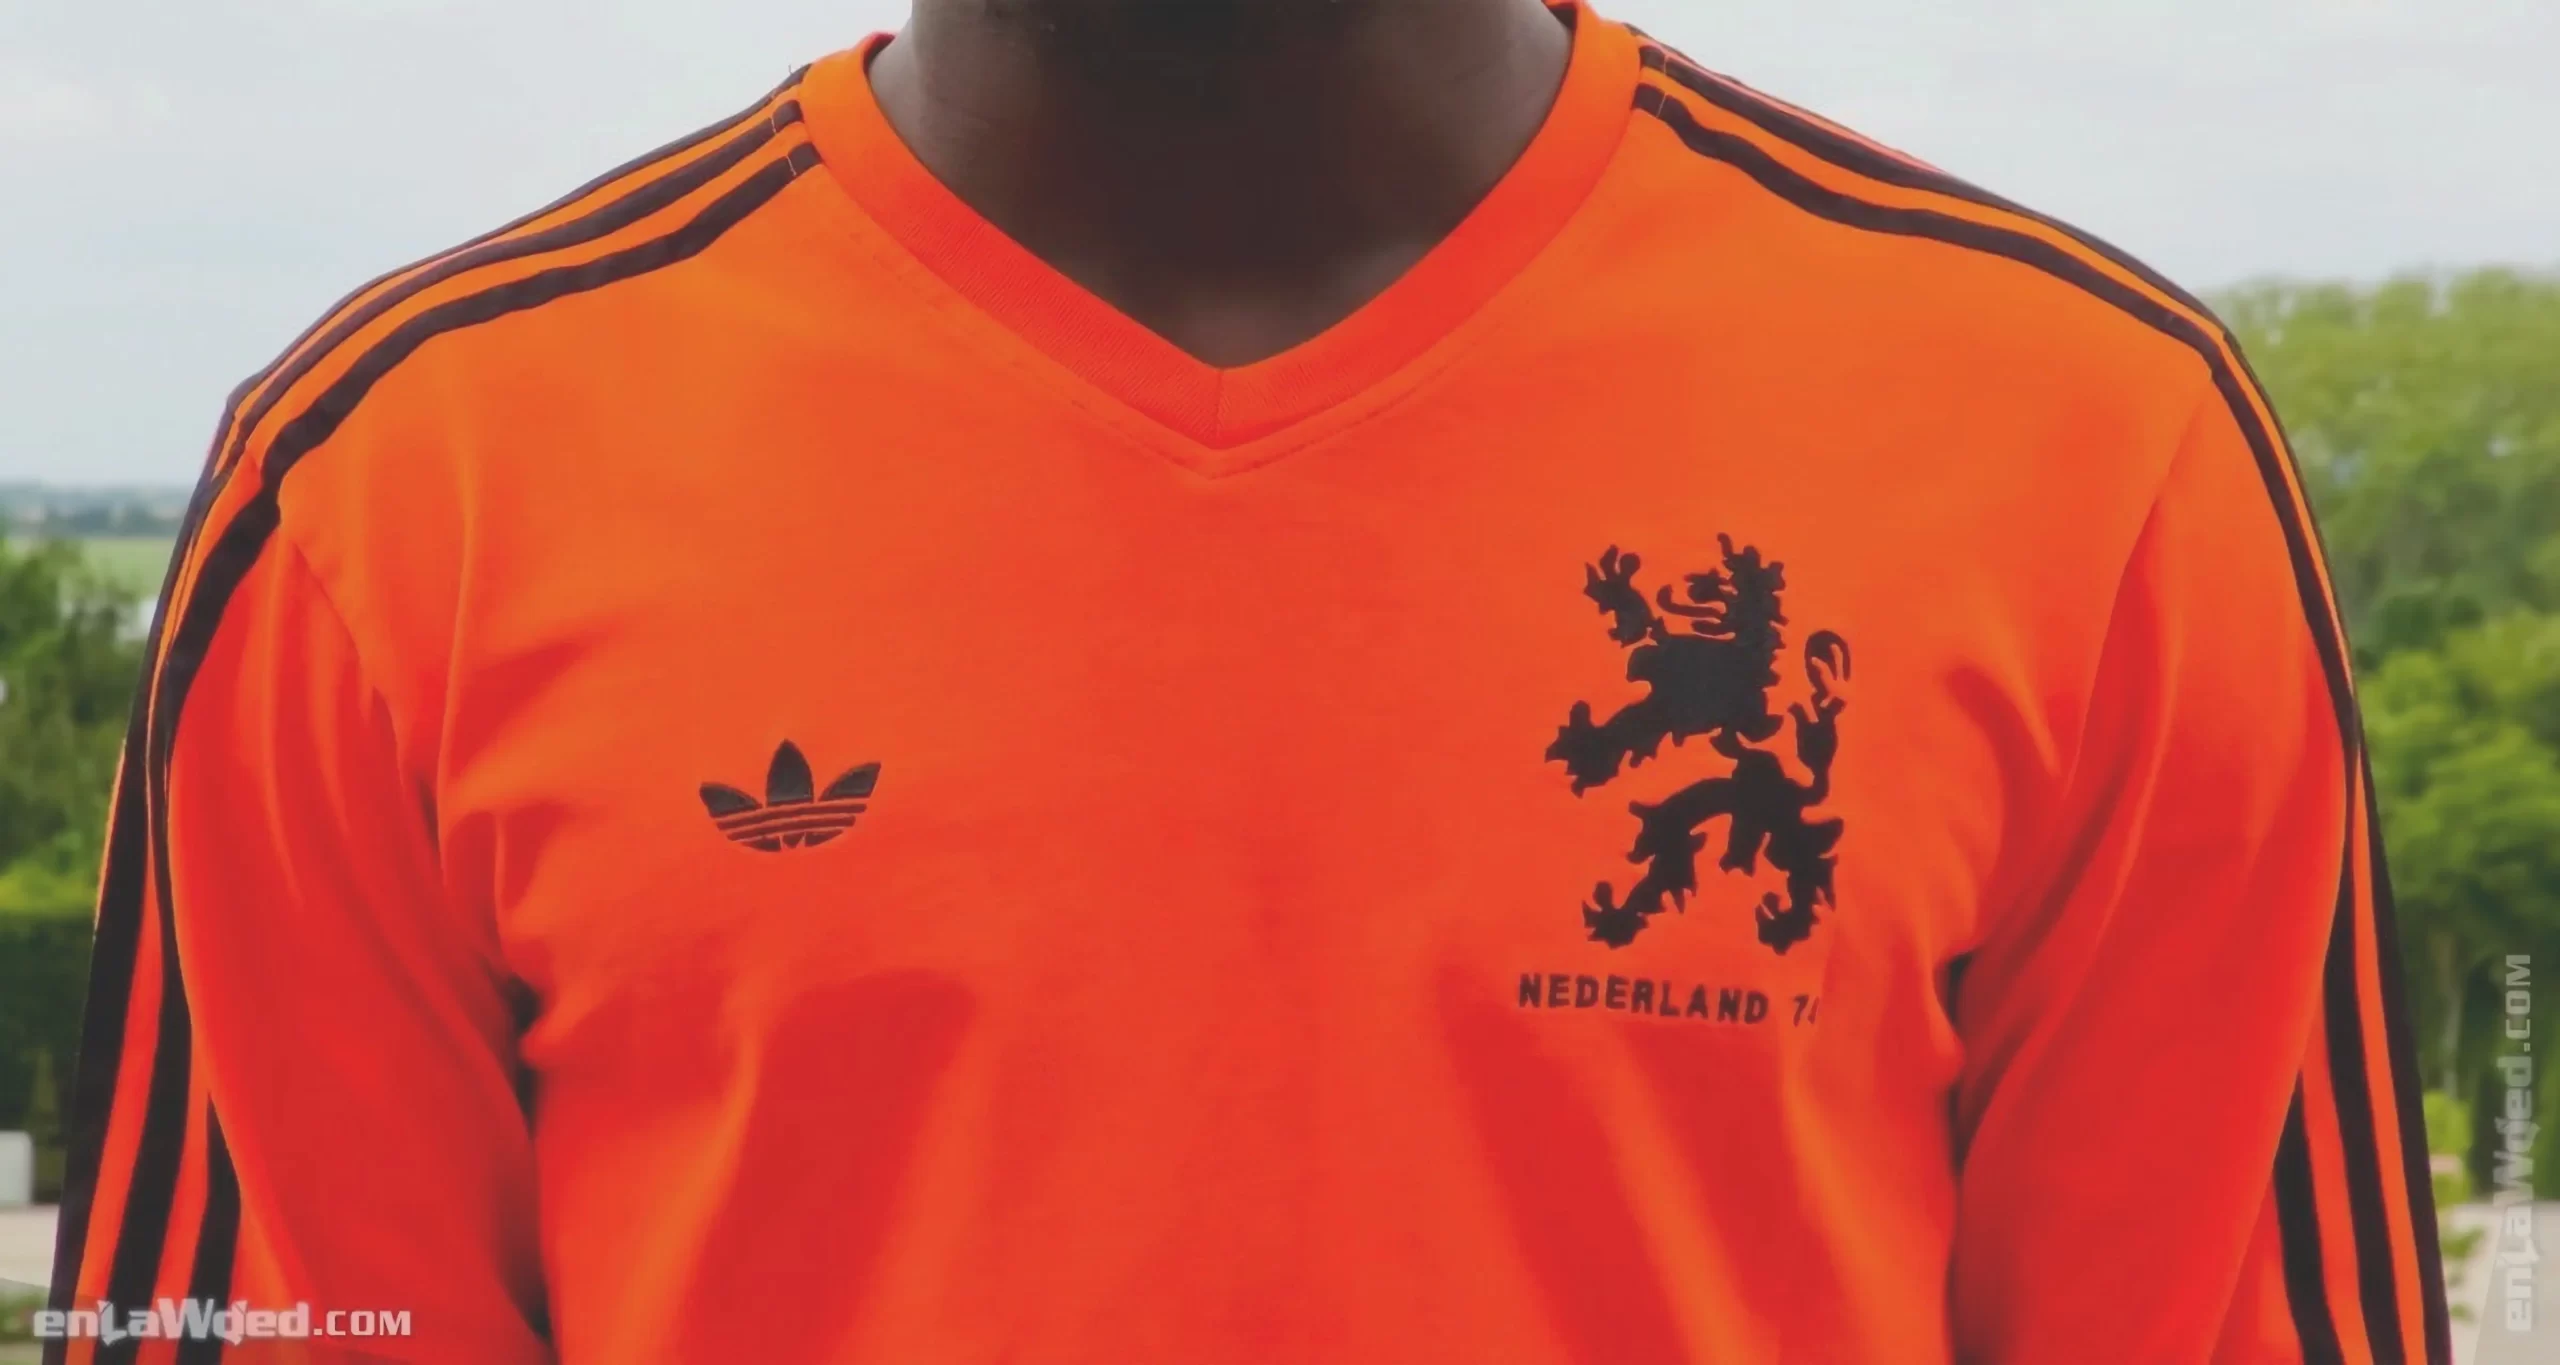 Men’s 2007 Netherlands ’74 Total Football LS by Adidas: Courageous (EnLawded.com file #lmc4wbl8f9t3eusyxz8)